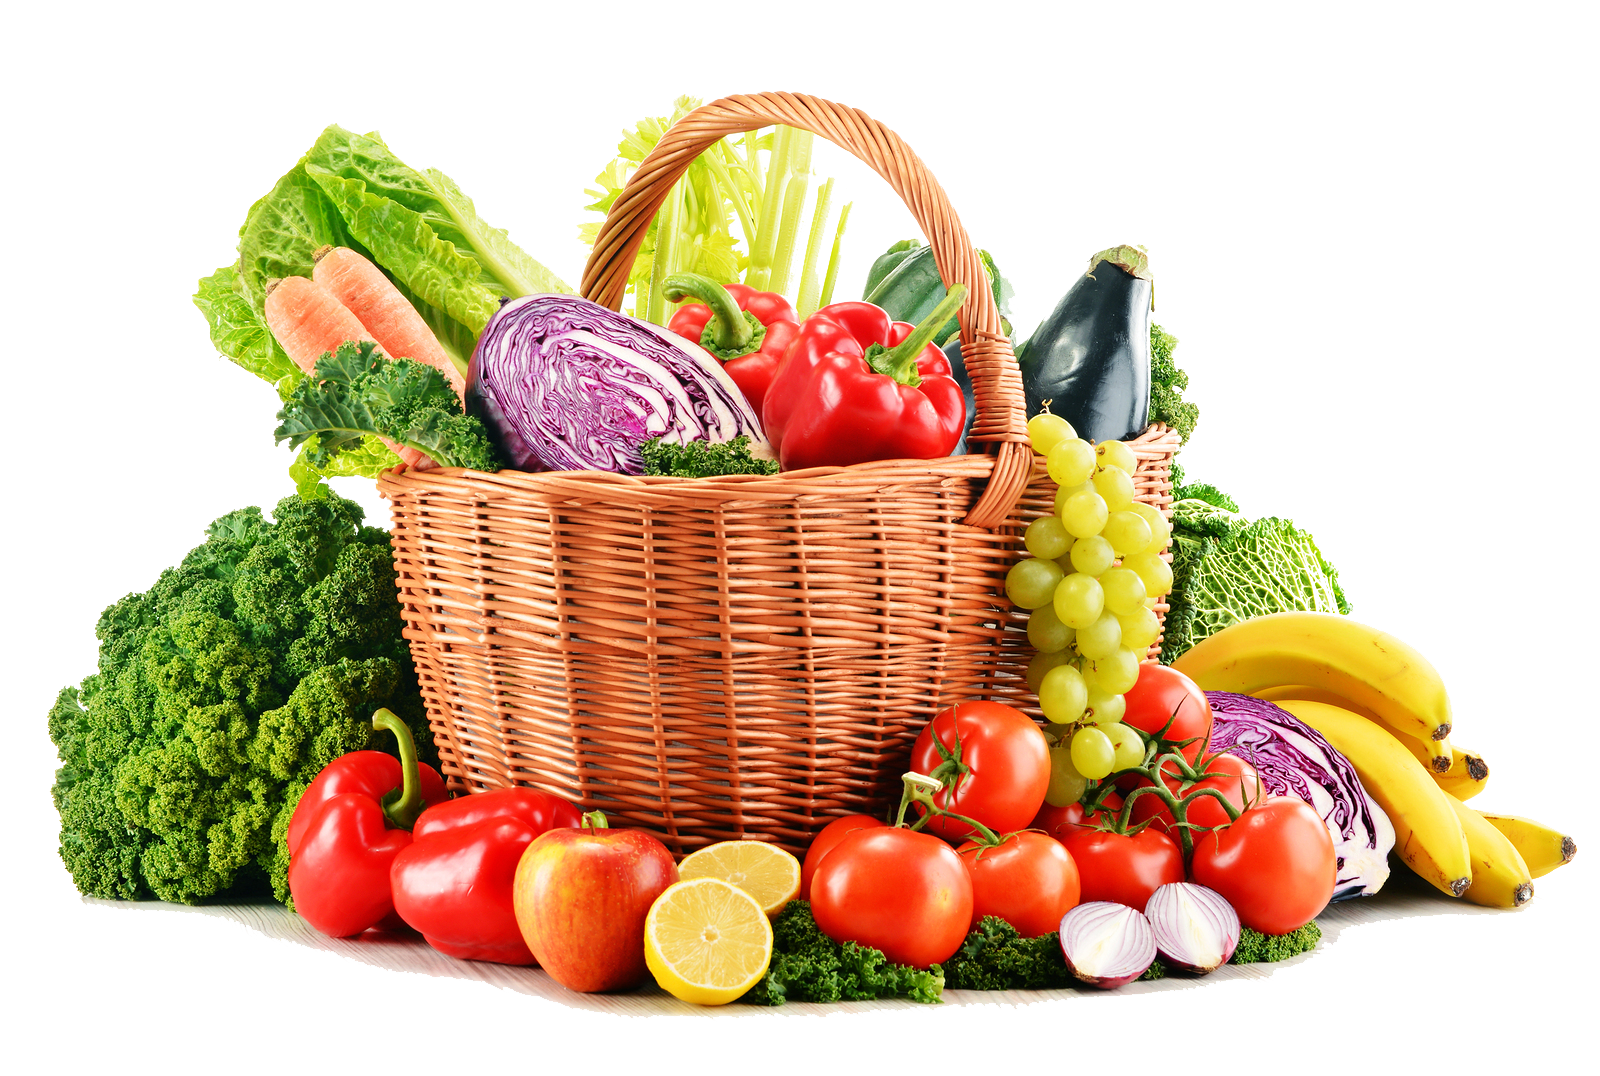 Download Vegetable PNG Photos.